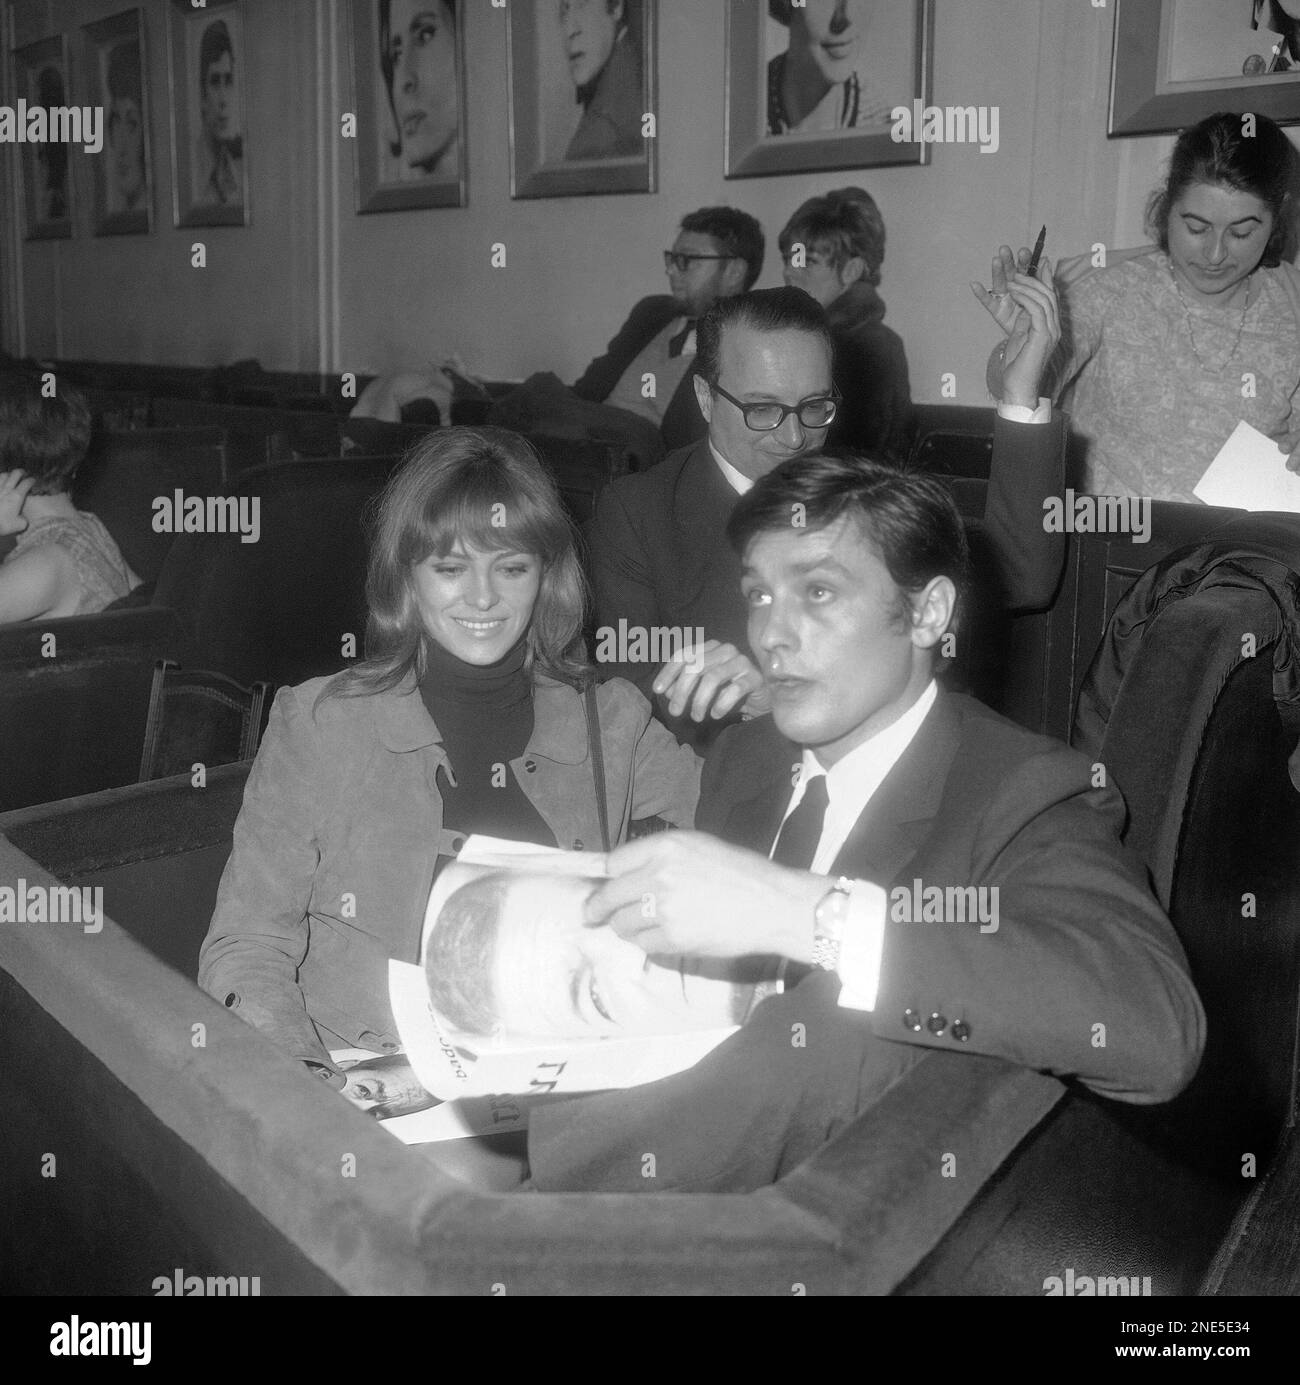 French Actor Alain Delon And His Wife Nathalie Attend The Paris Bobino Music Hall Premiere Of